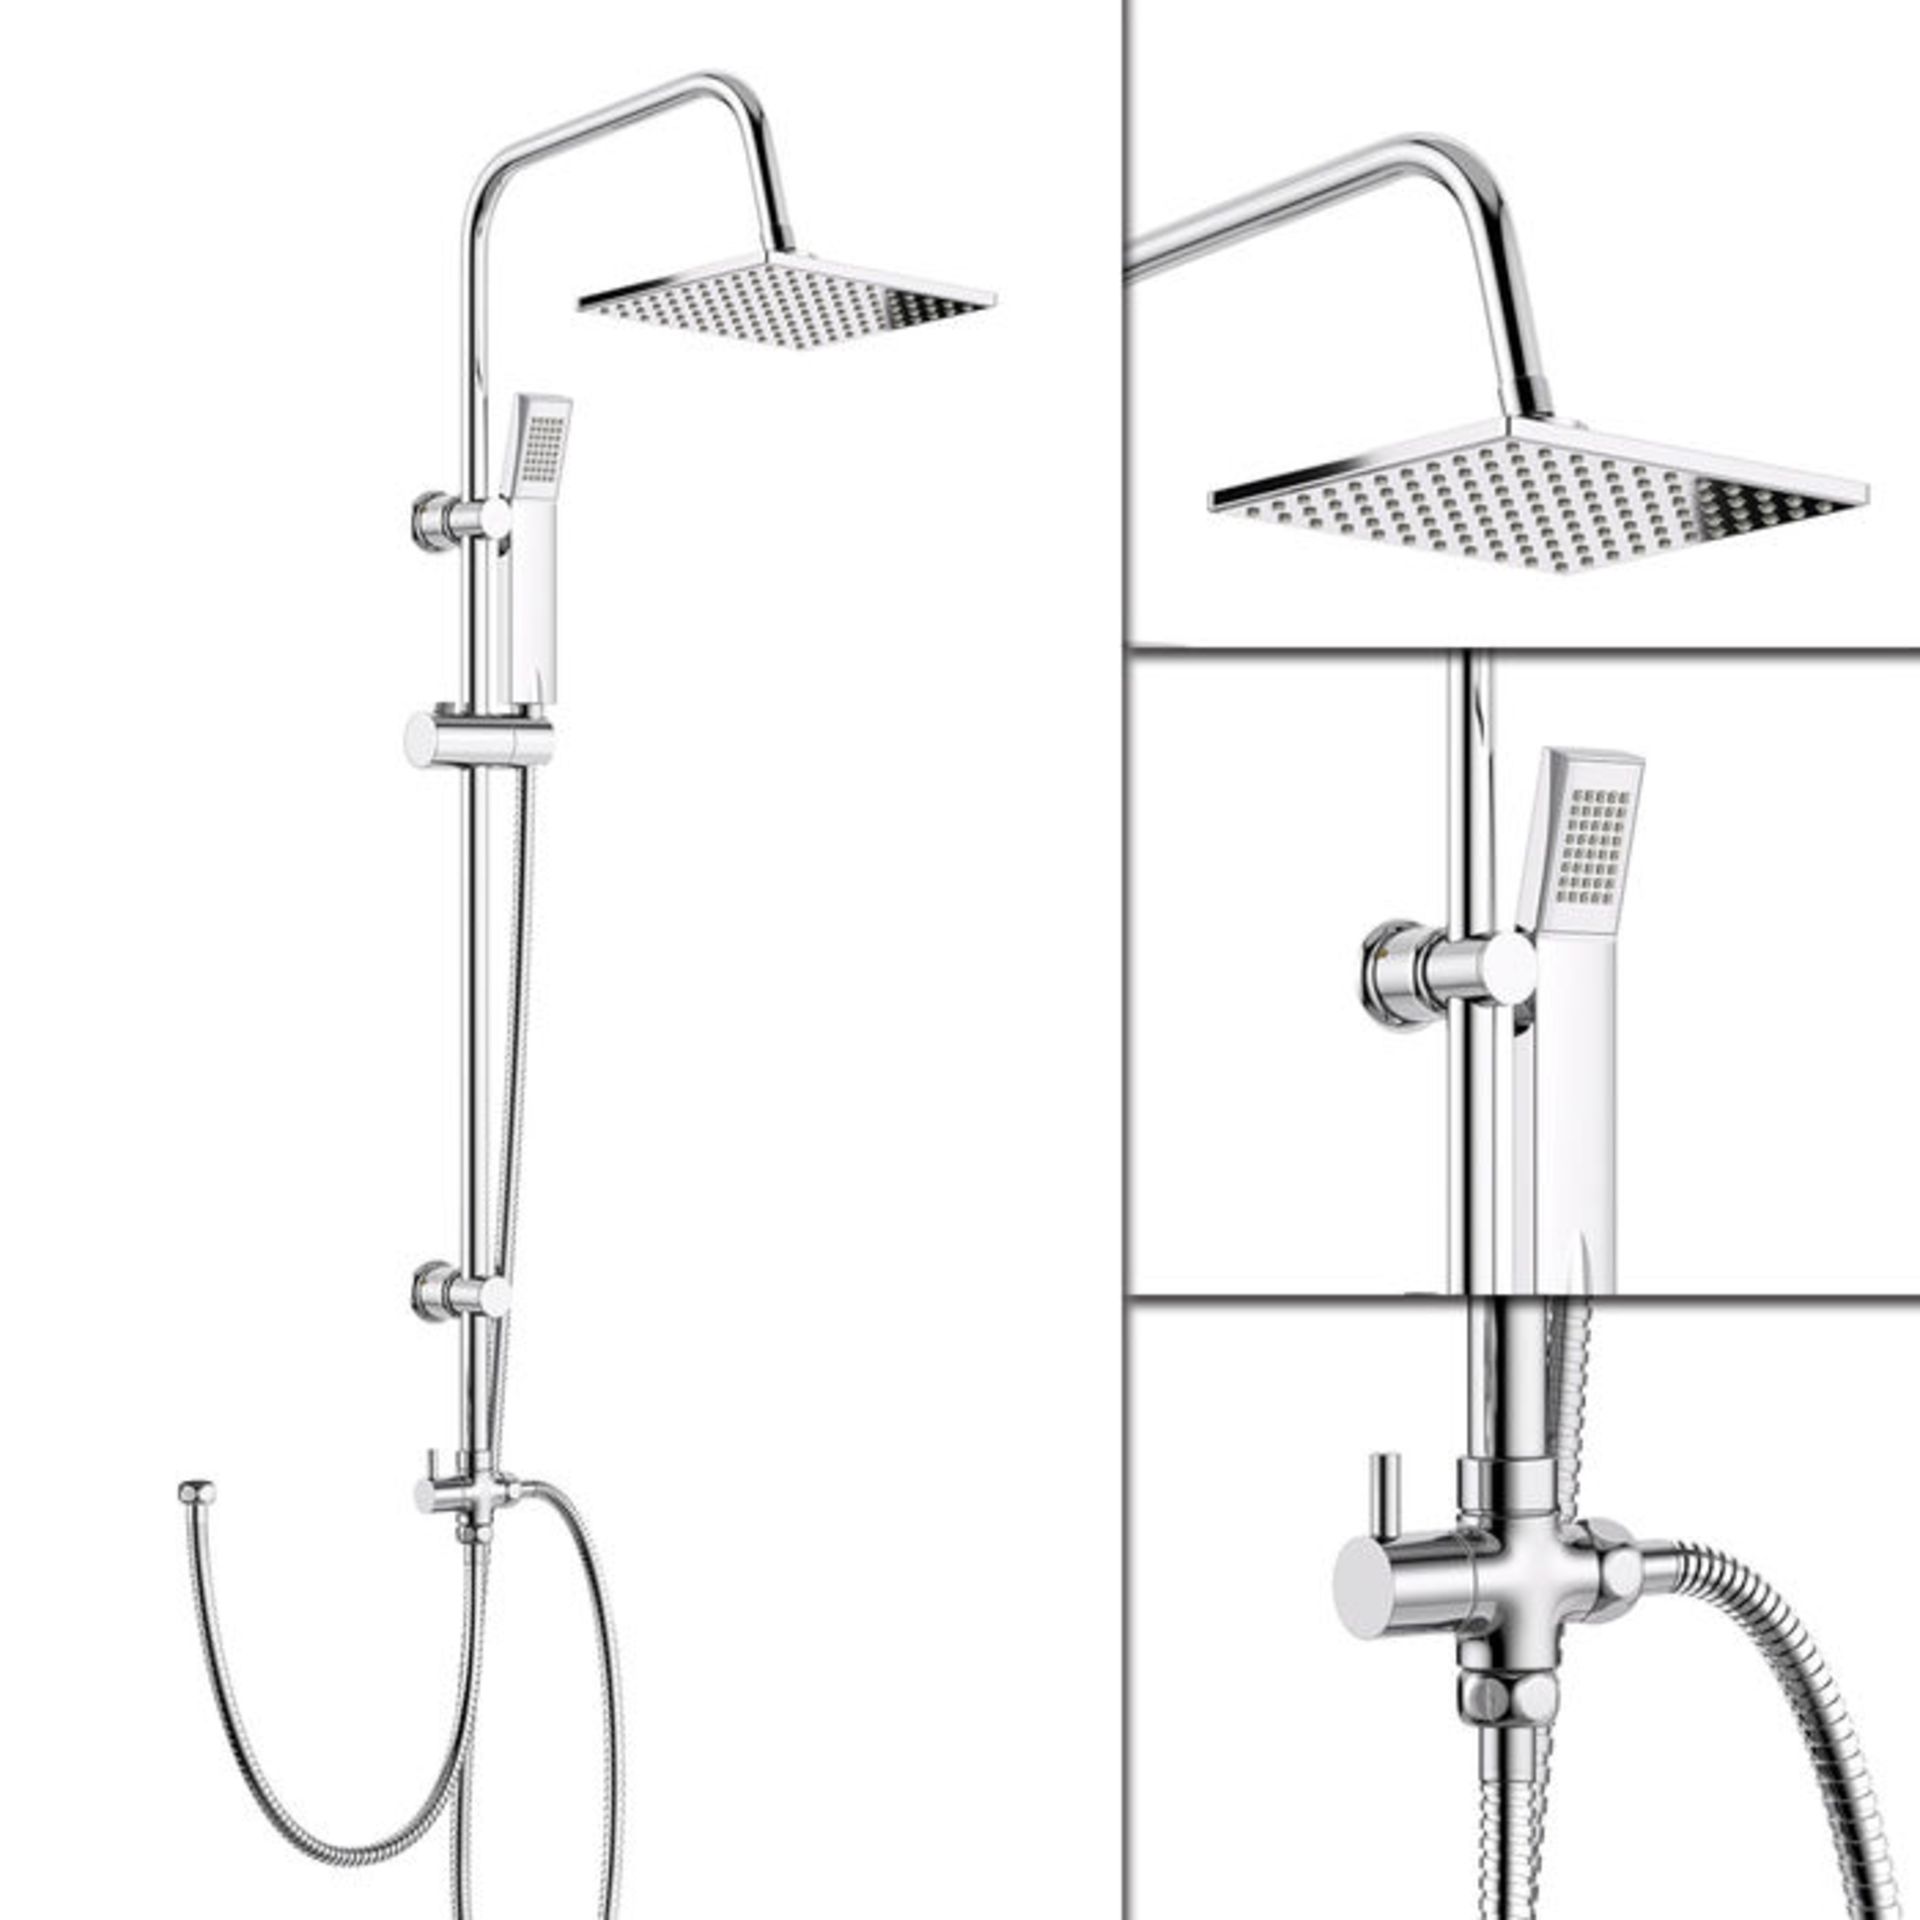 (OS126) 200mm Square Head, Riser Rail & Handheld Kit. .. Quality stainless steel shower head with - Image 3 of 3